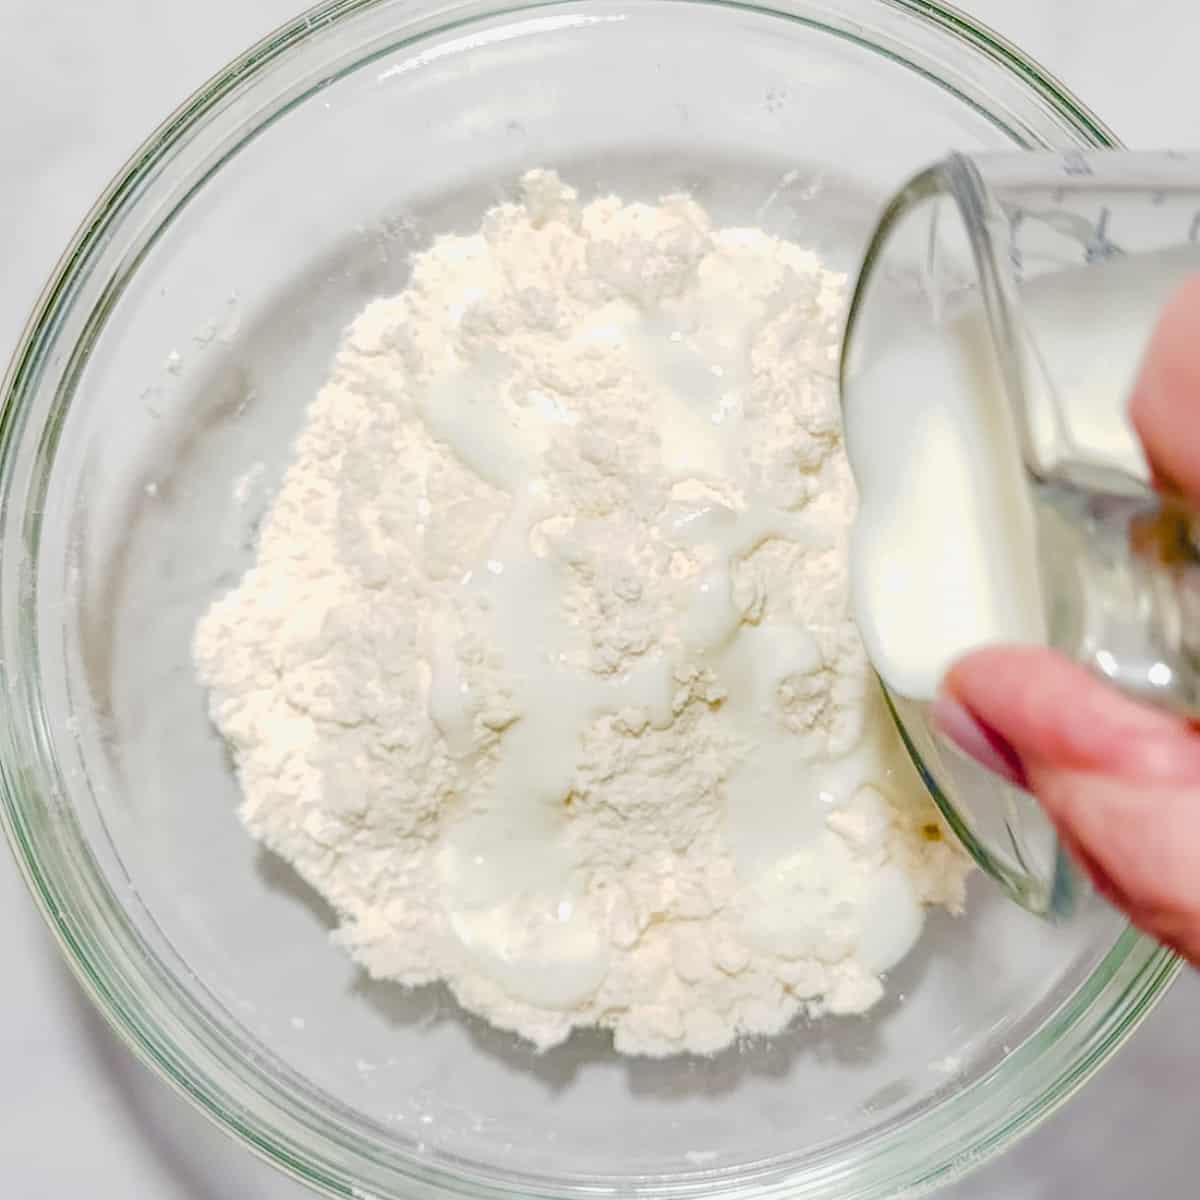 pouring buttermilk into dry biscuit ingredients.